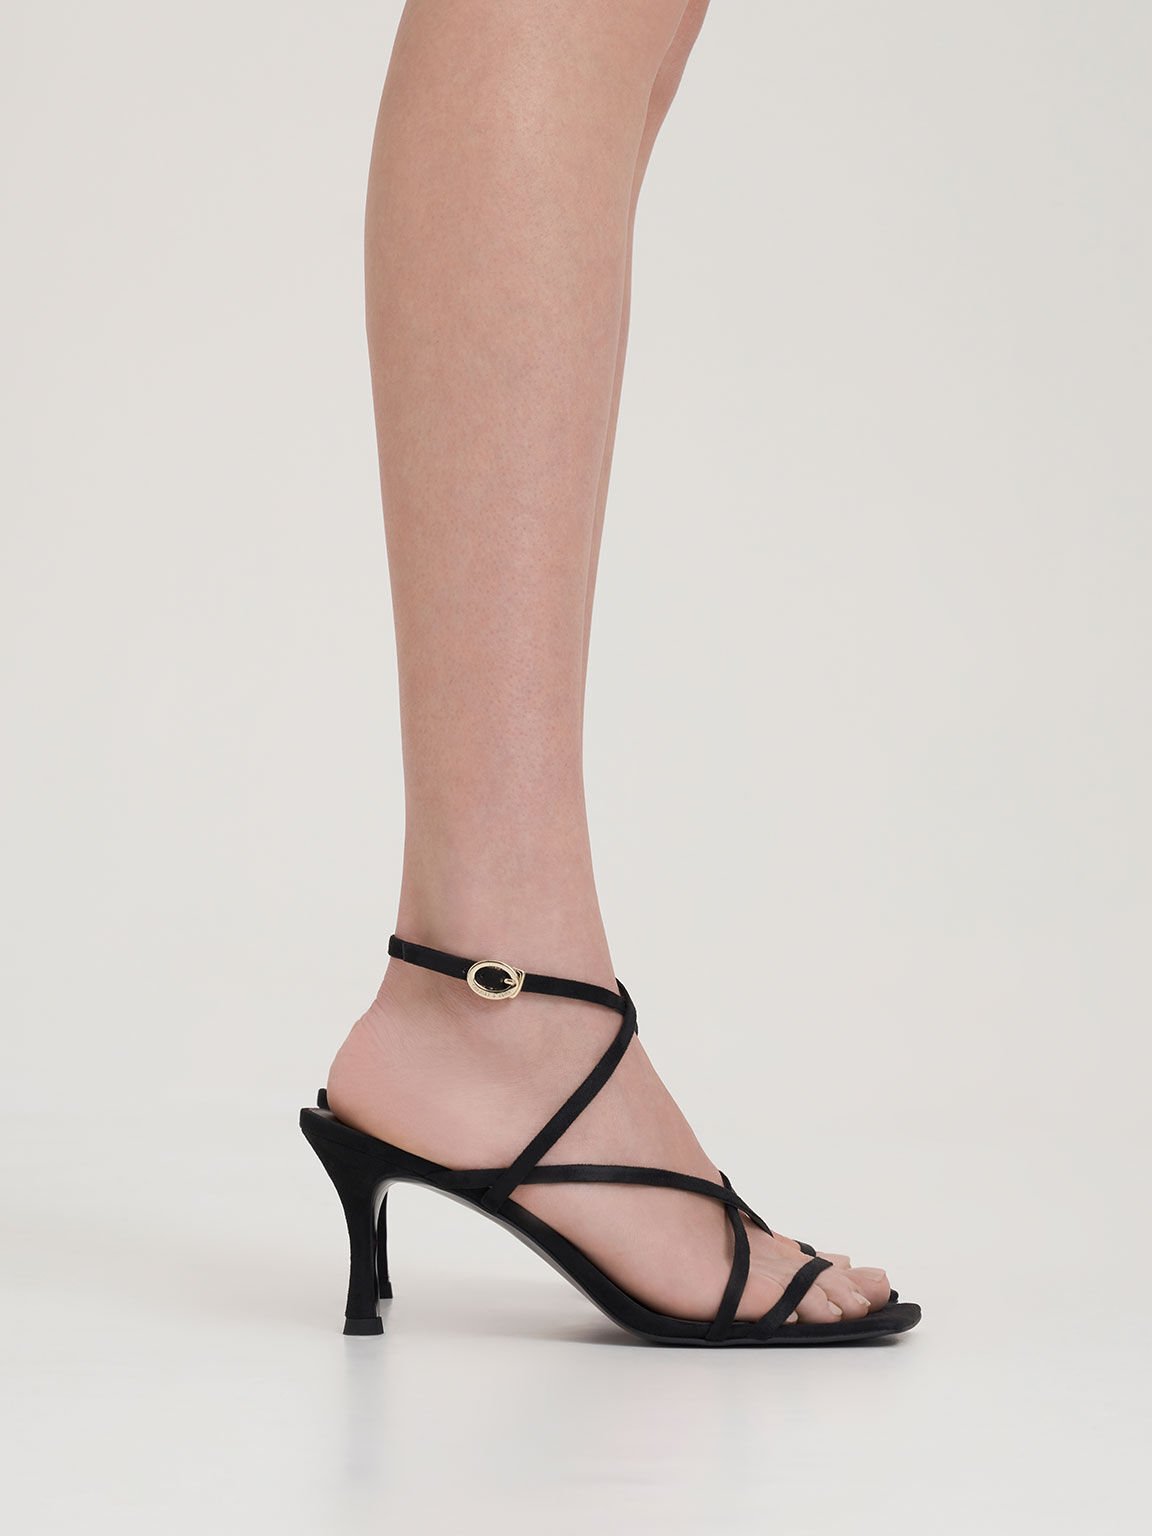 Textured Crossover Strappy Sandals, Black, hi-res